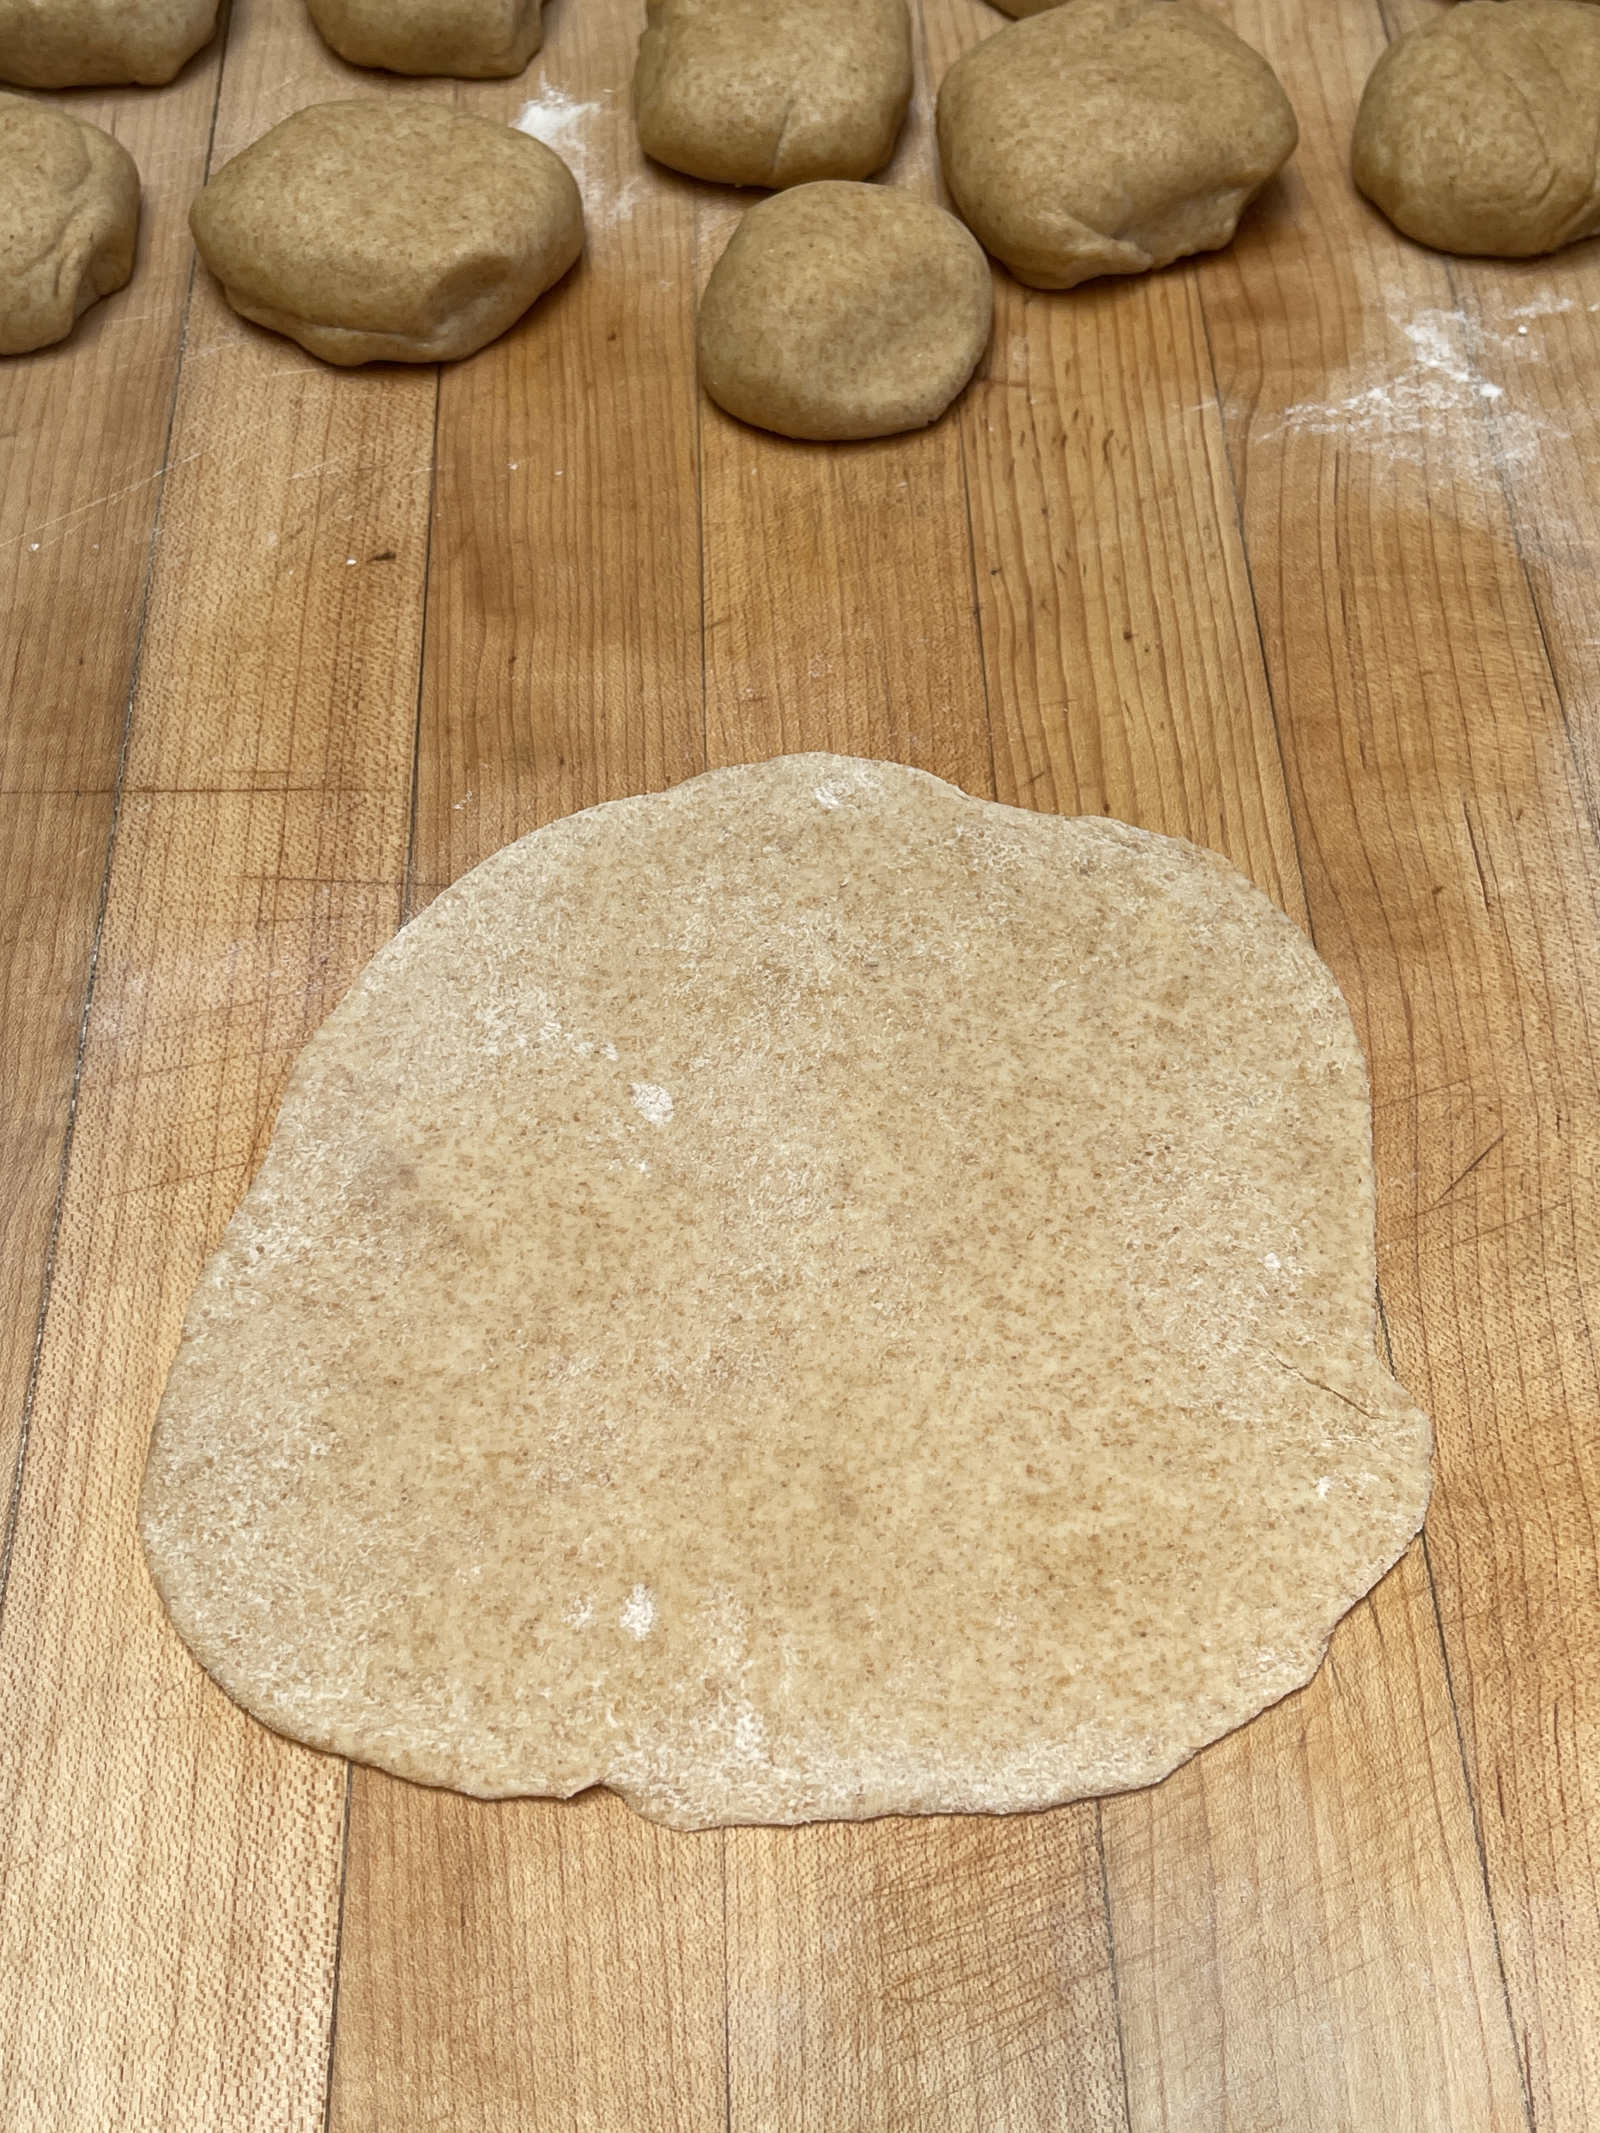 A rolled out tortilla sits on a wooden cutting board